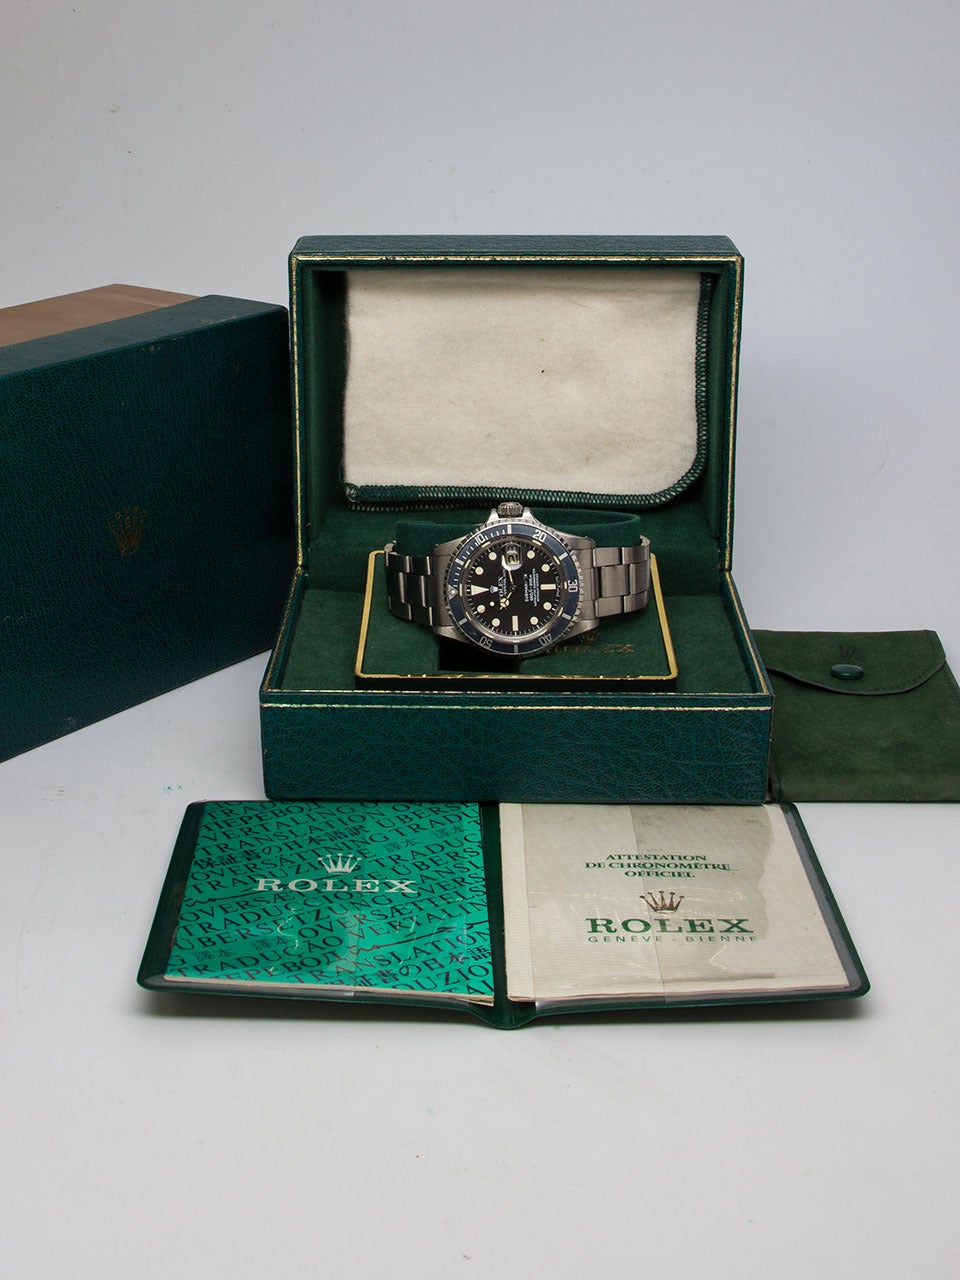 Rolex Stainless Steel Submariner Wristwatch ref 1680 with box and papers 1